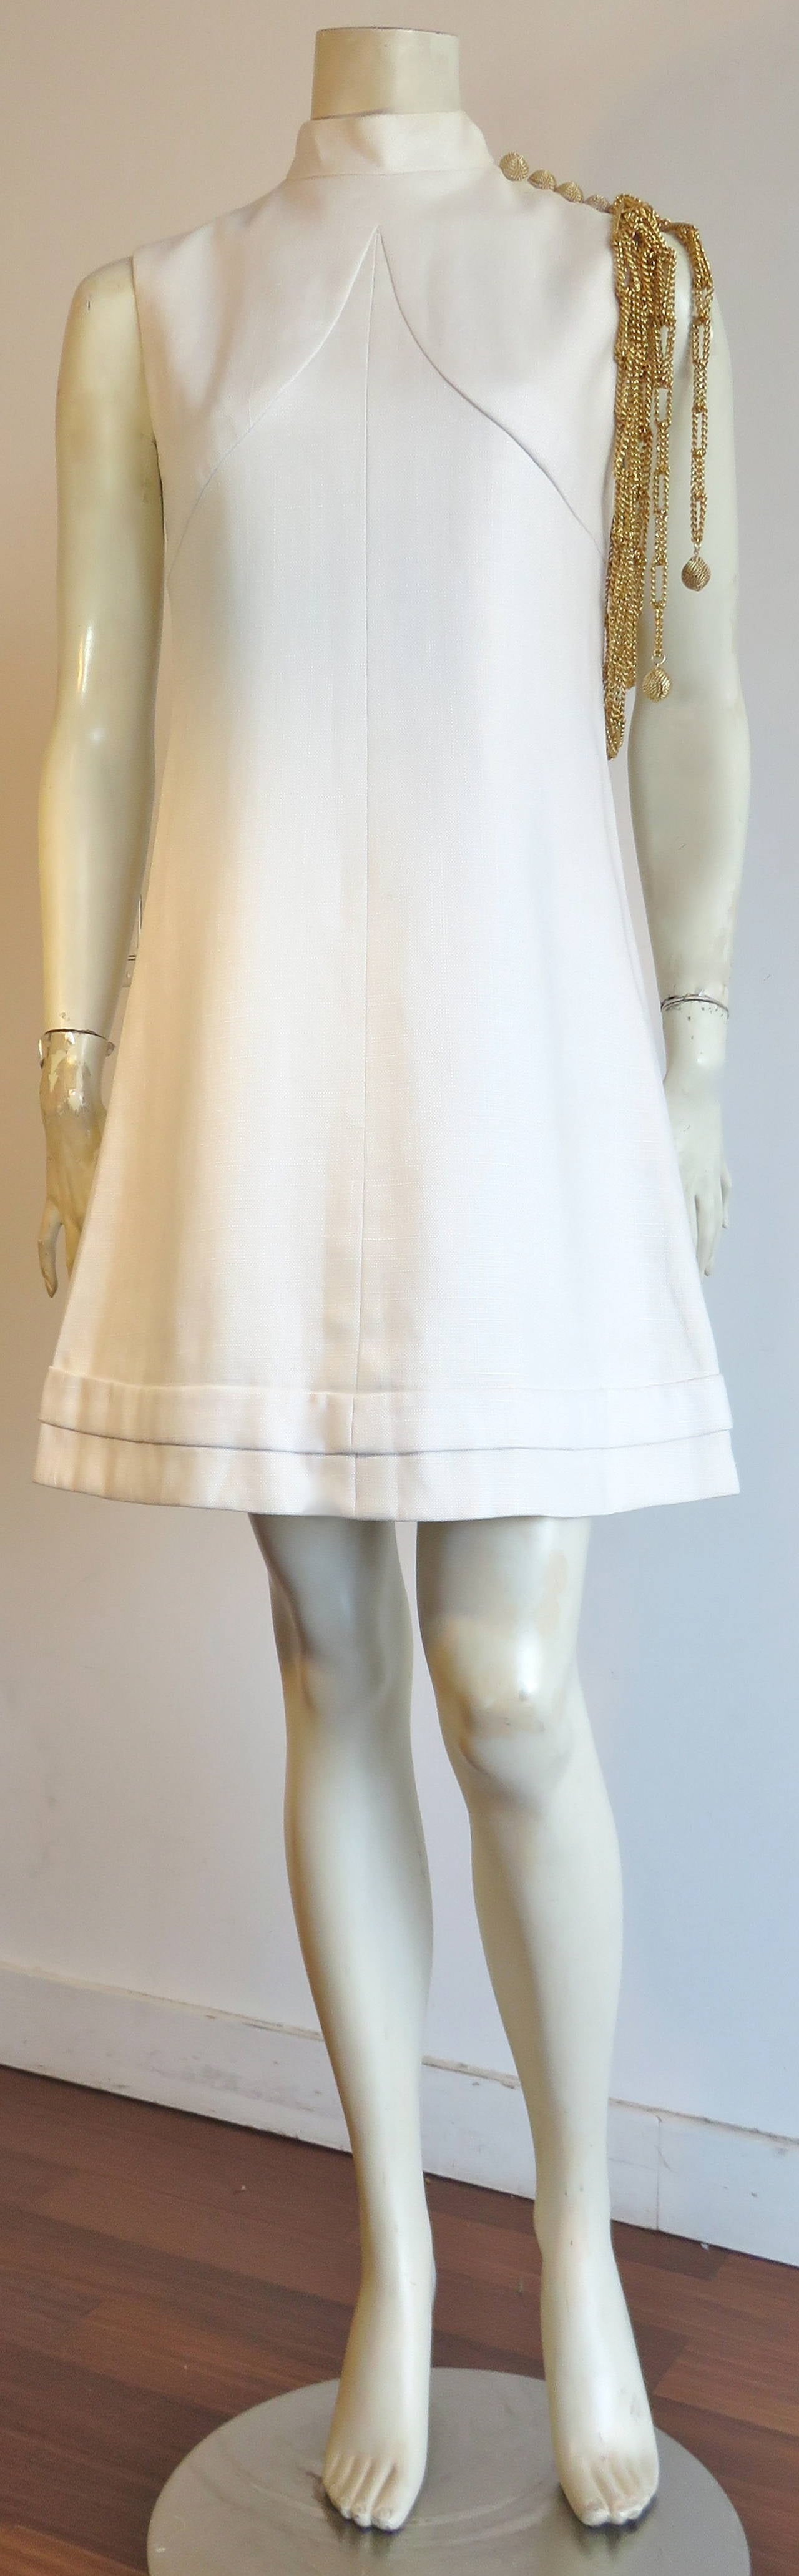 Documented, 1960's BILL BLASS For MAURICE RENTNER Chain detail dress.

The great, white linen day dress includes the original, gold-finished, side shoulder chain detail with ball chain ends.  

The wearer's left shoulder features dome-shaped,